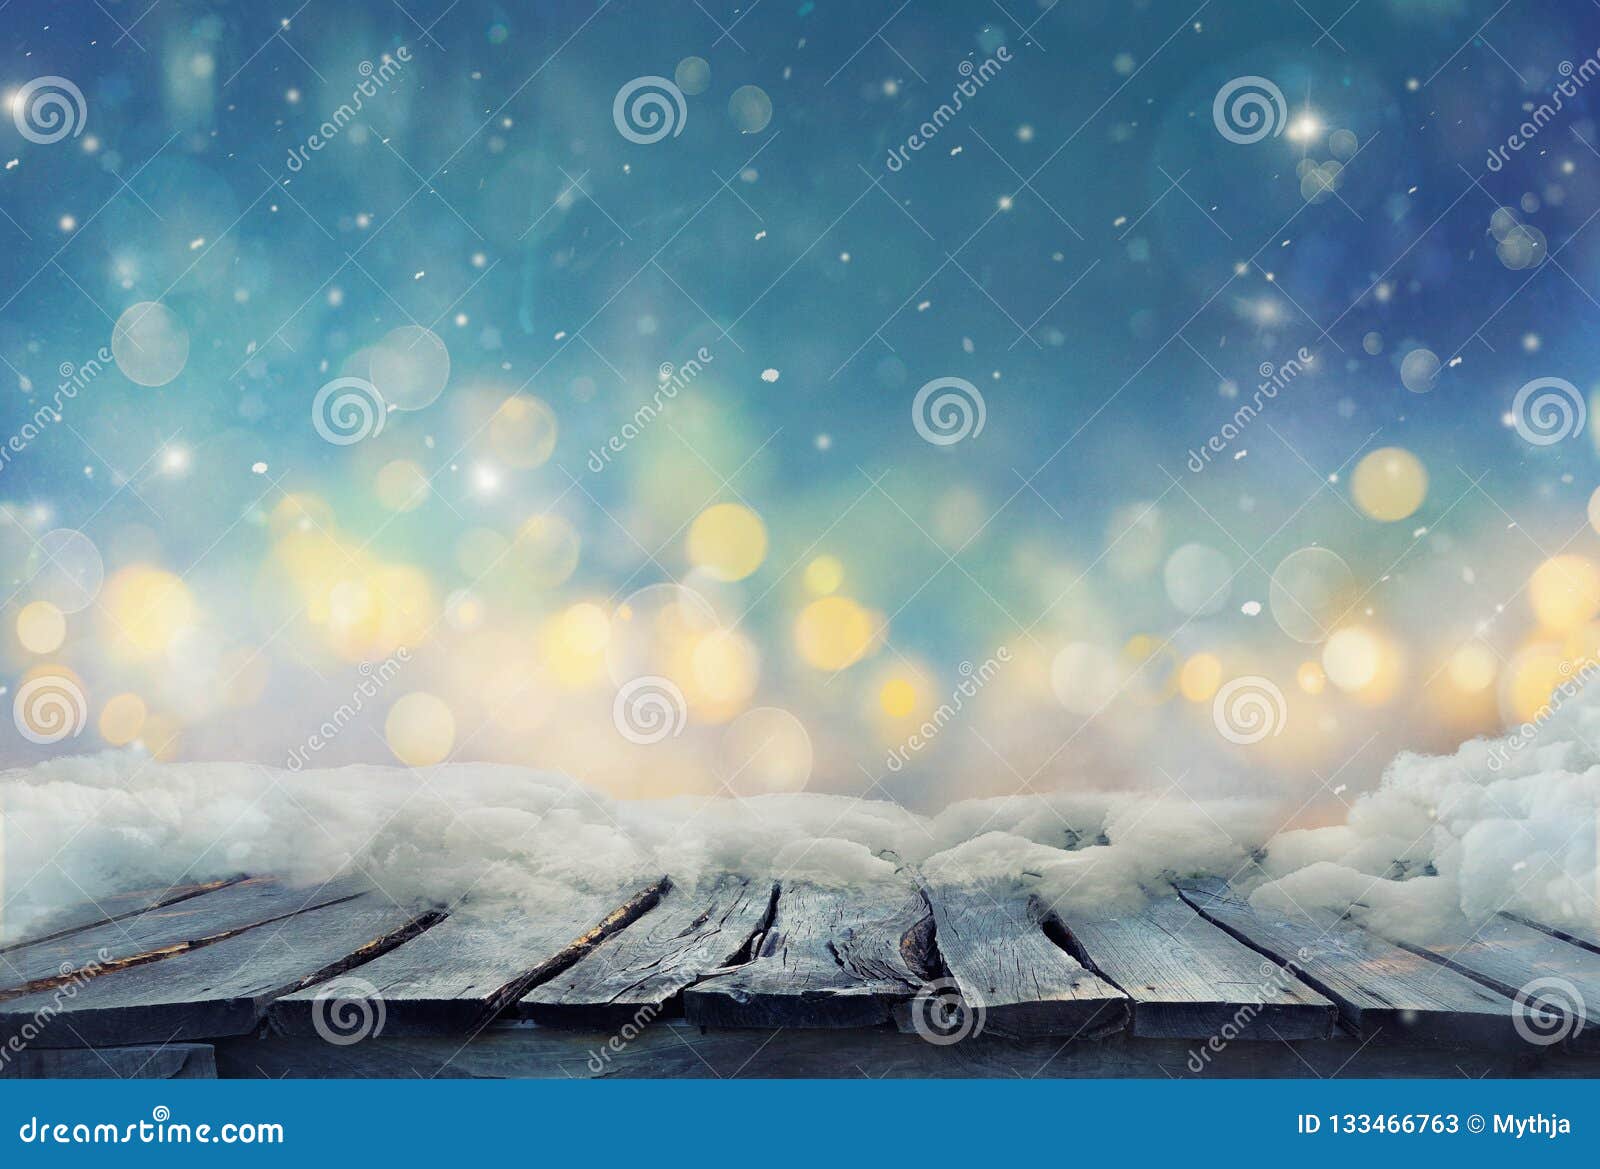 winter . christmas background with frozen table. blurred